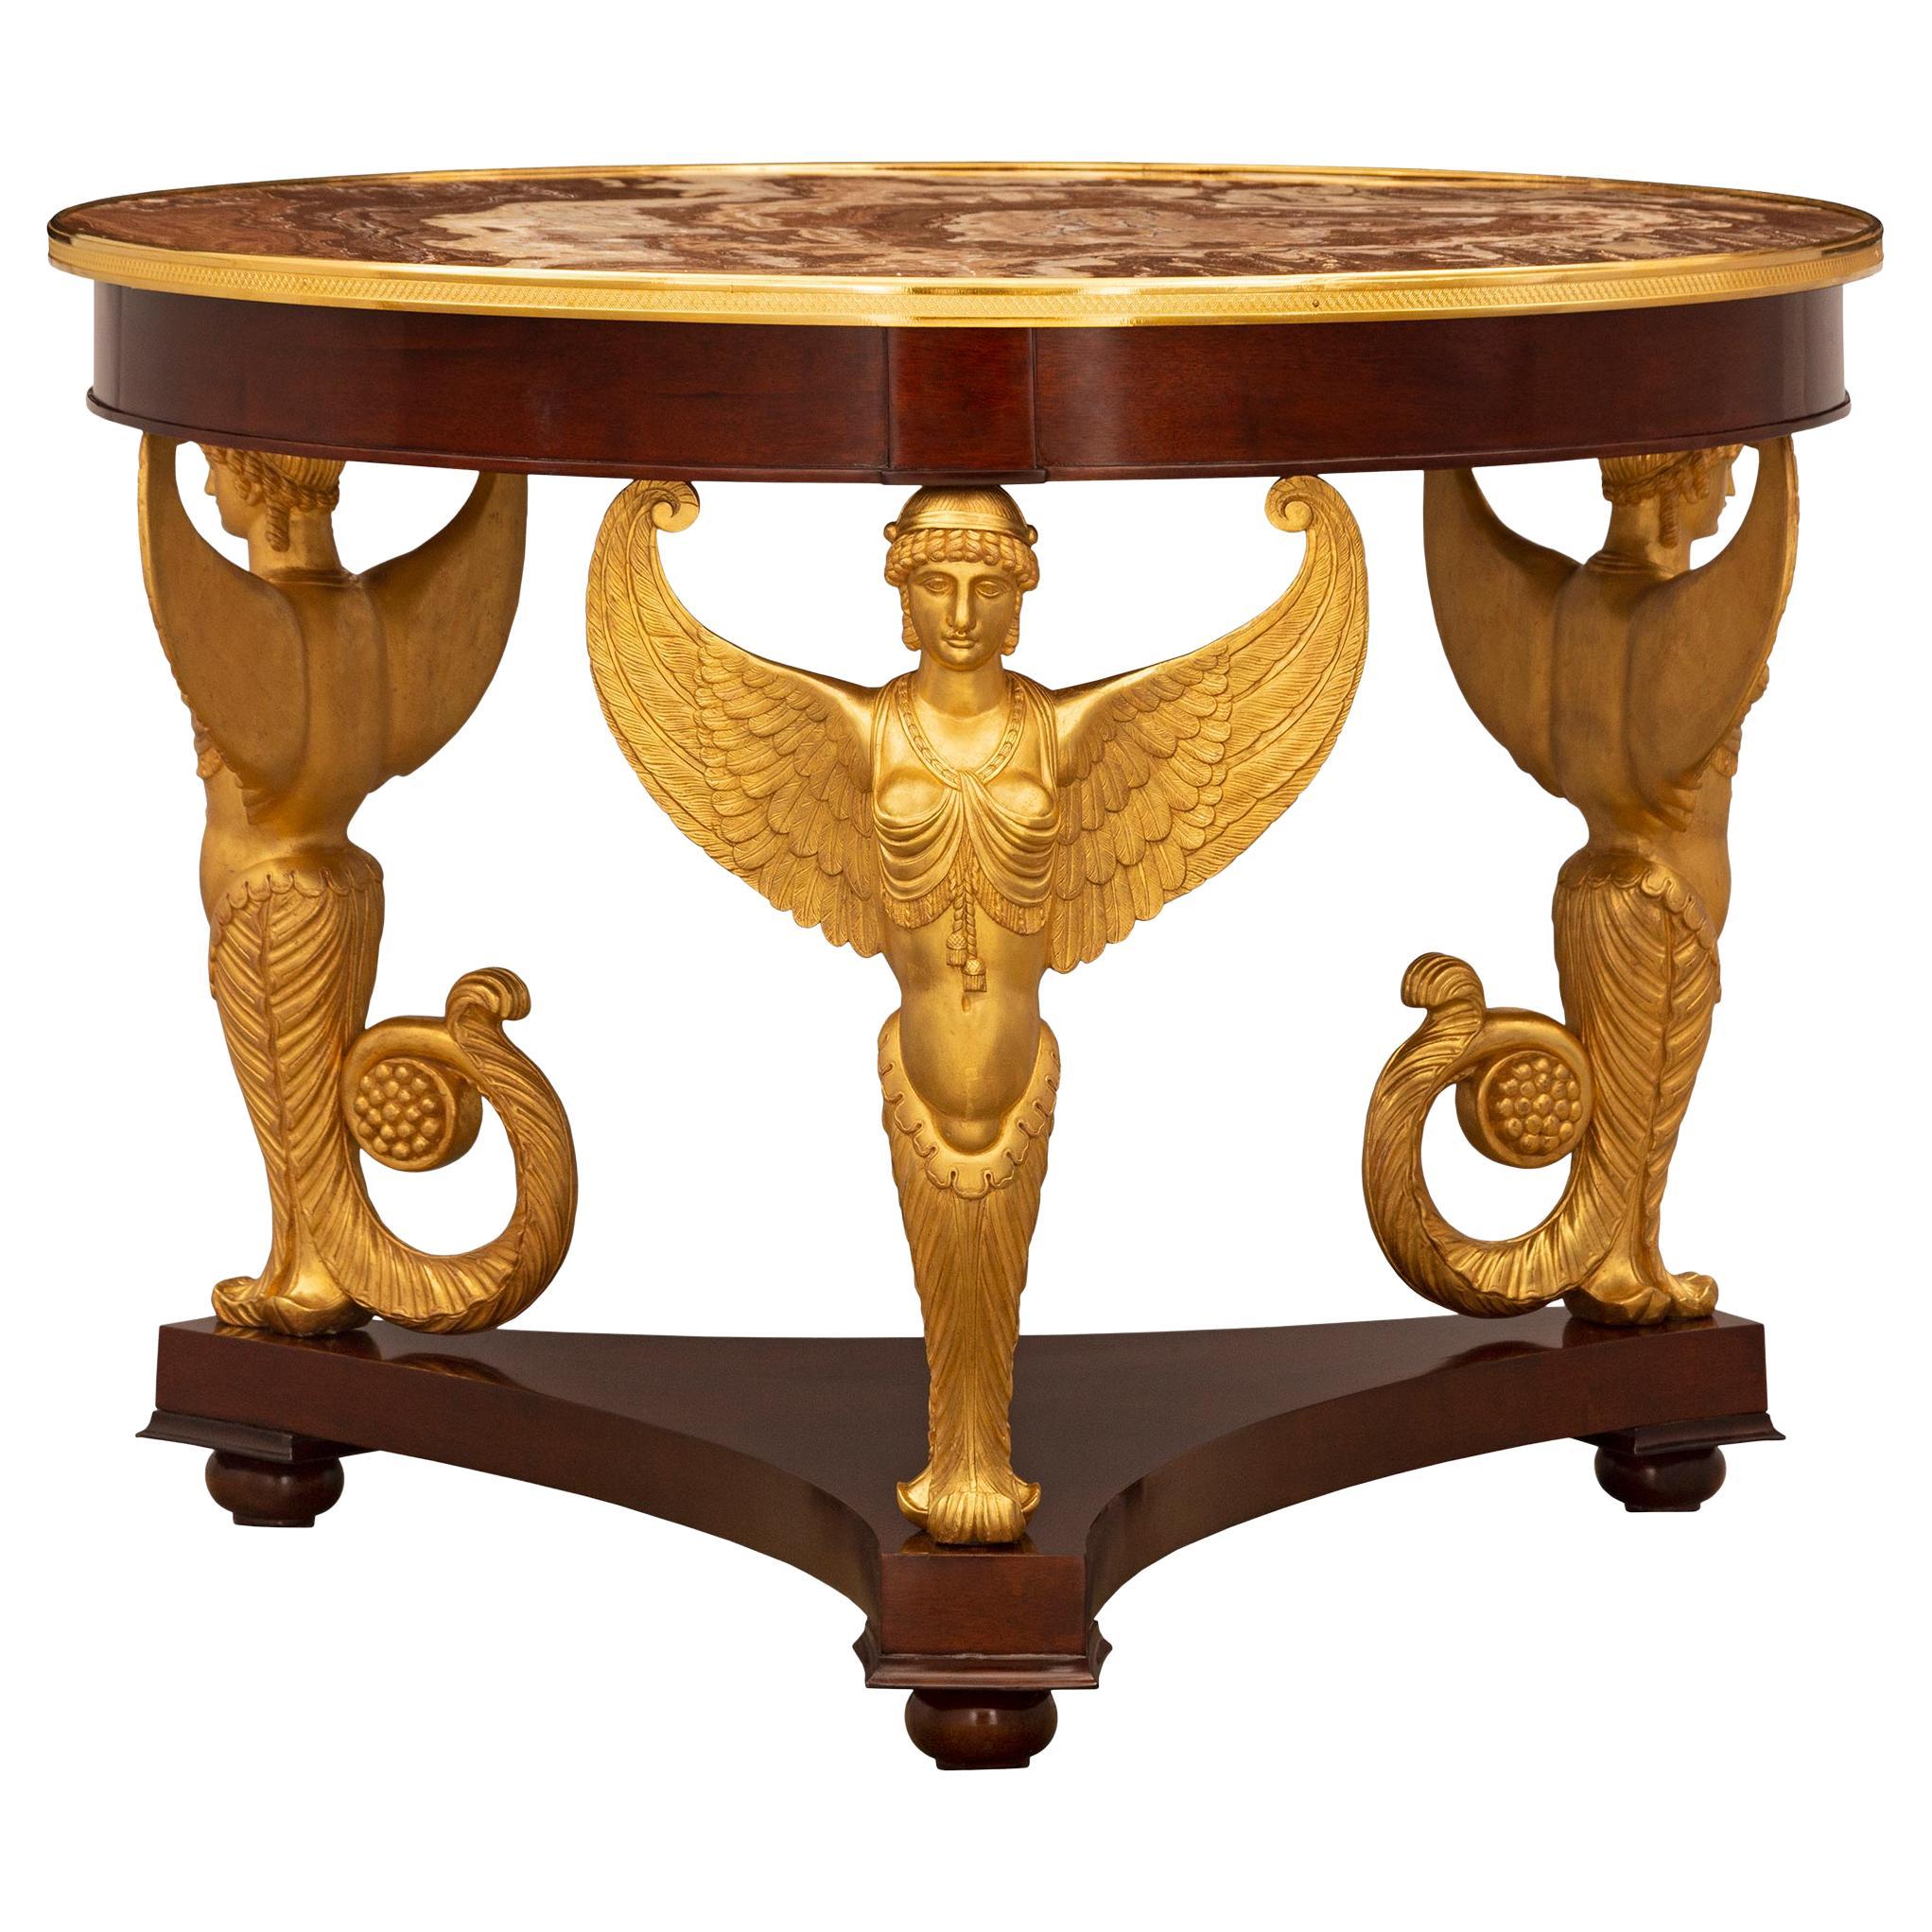 French 19th Century Empire St. Mahogany, Giltwood, Ormolu And Marble Table